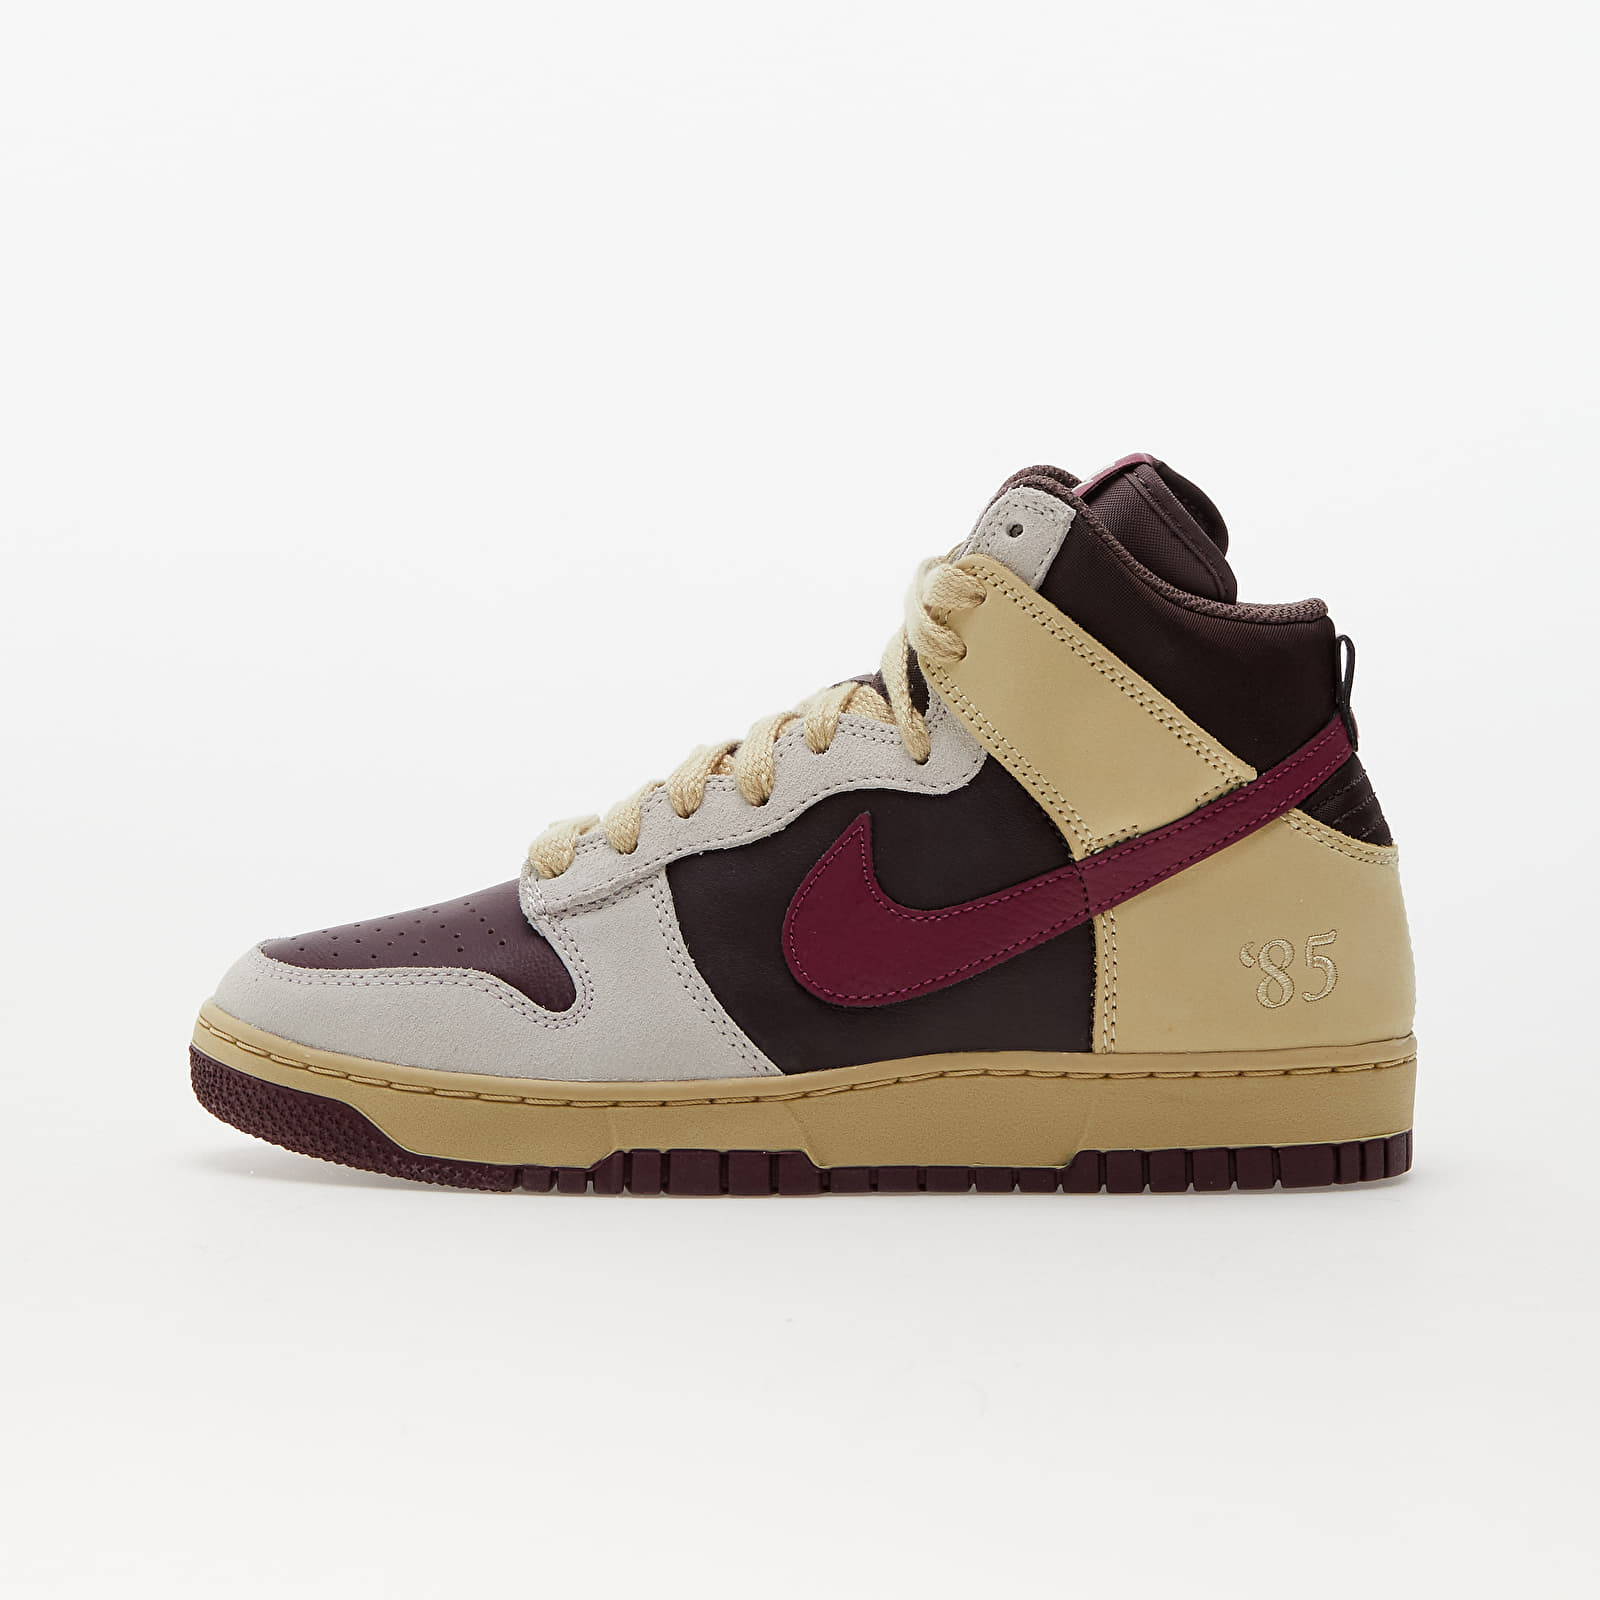 Men's sneakers and shoes Nike Wmns Dunk High 1985 Alabaster/ Rosewood-Earth-Night Maroon